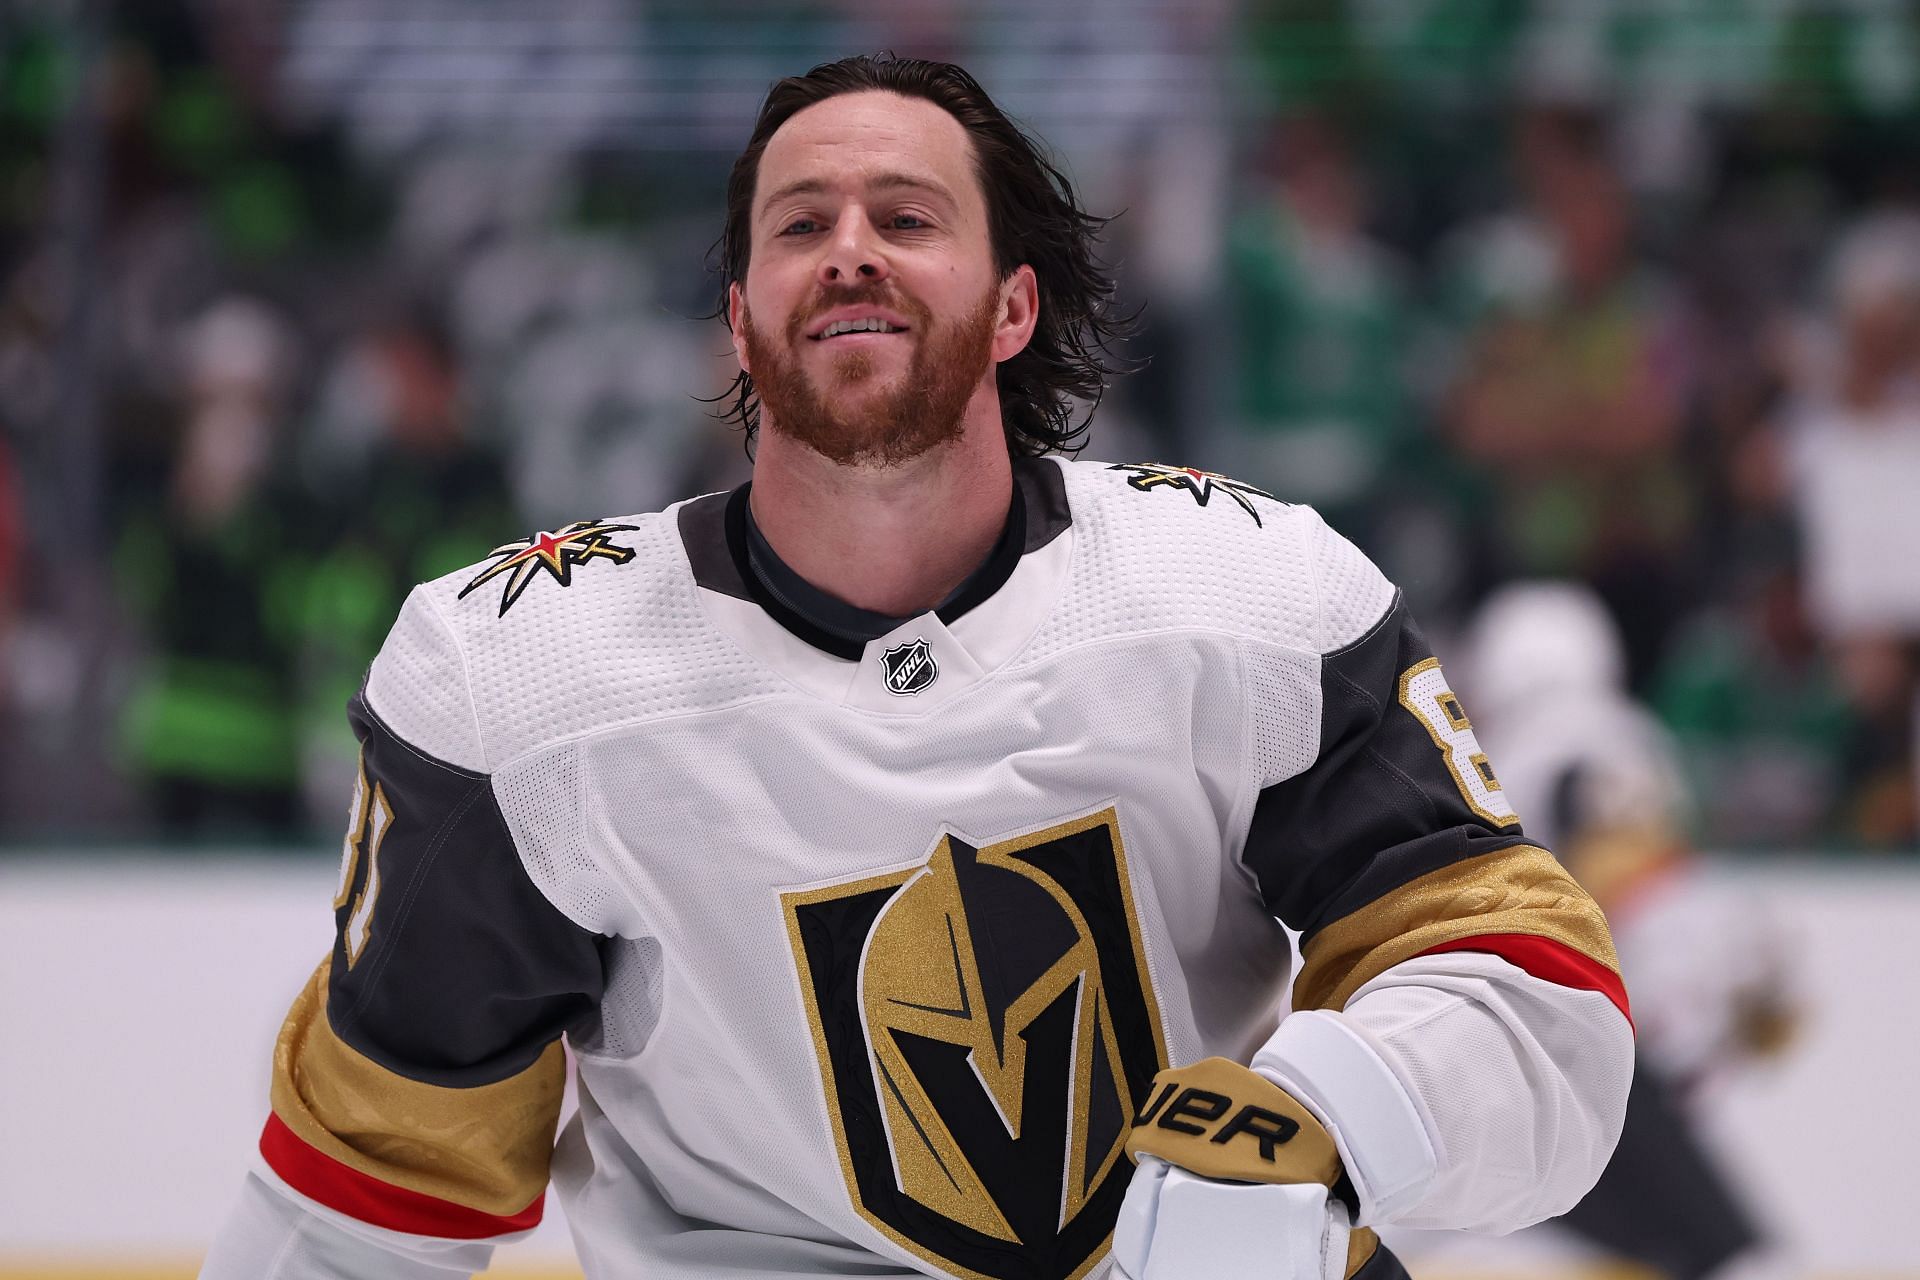 Jonathan Marchessault On Having Past Playoff Experience 